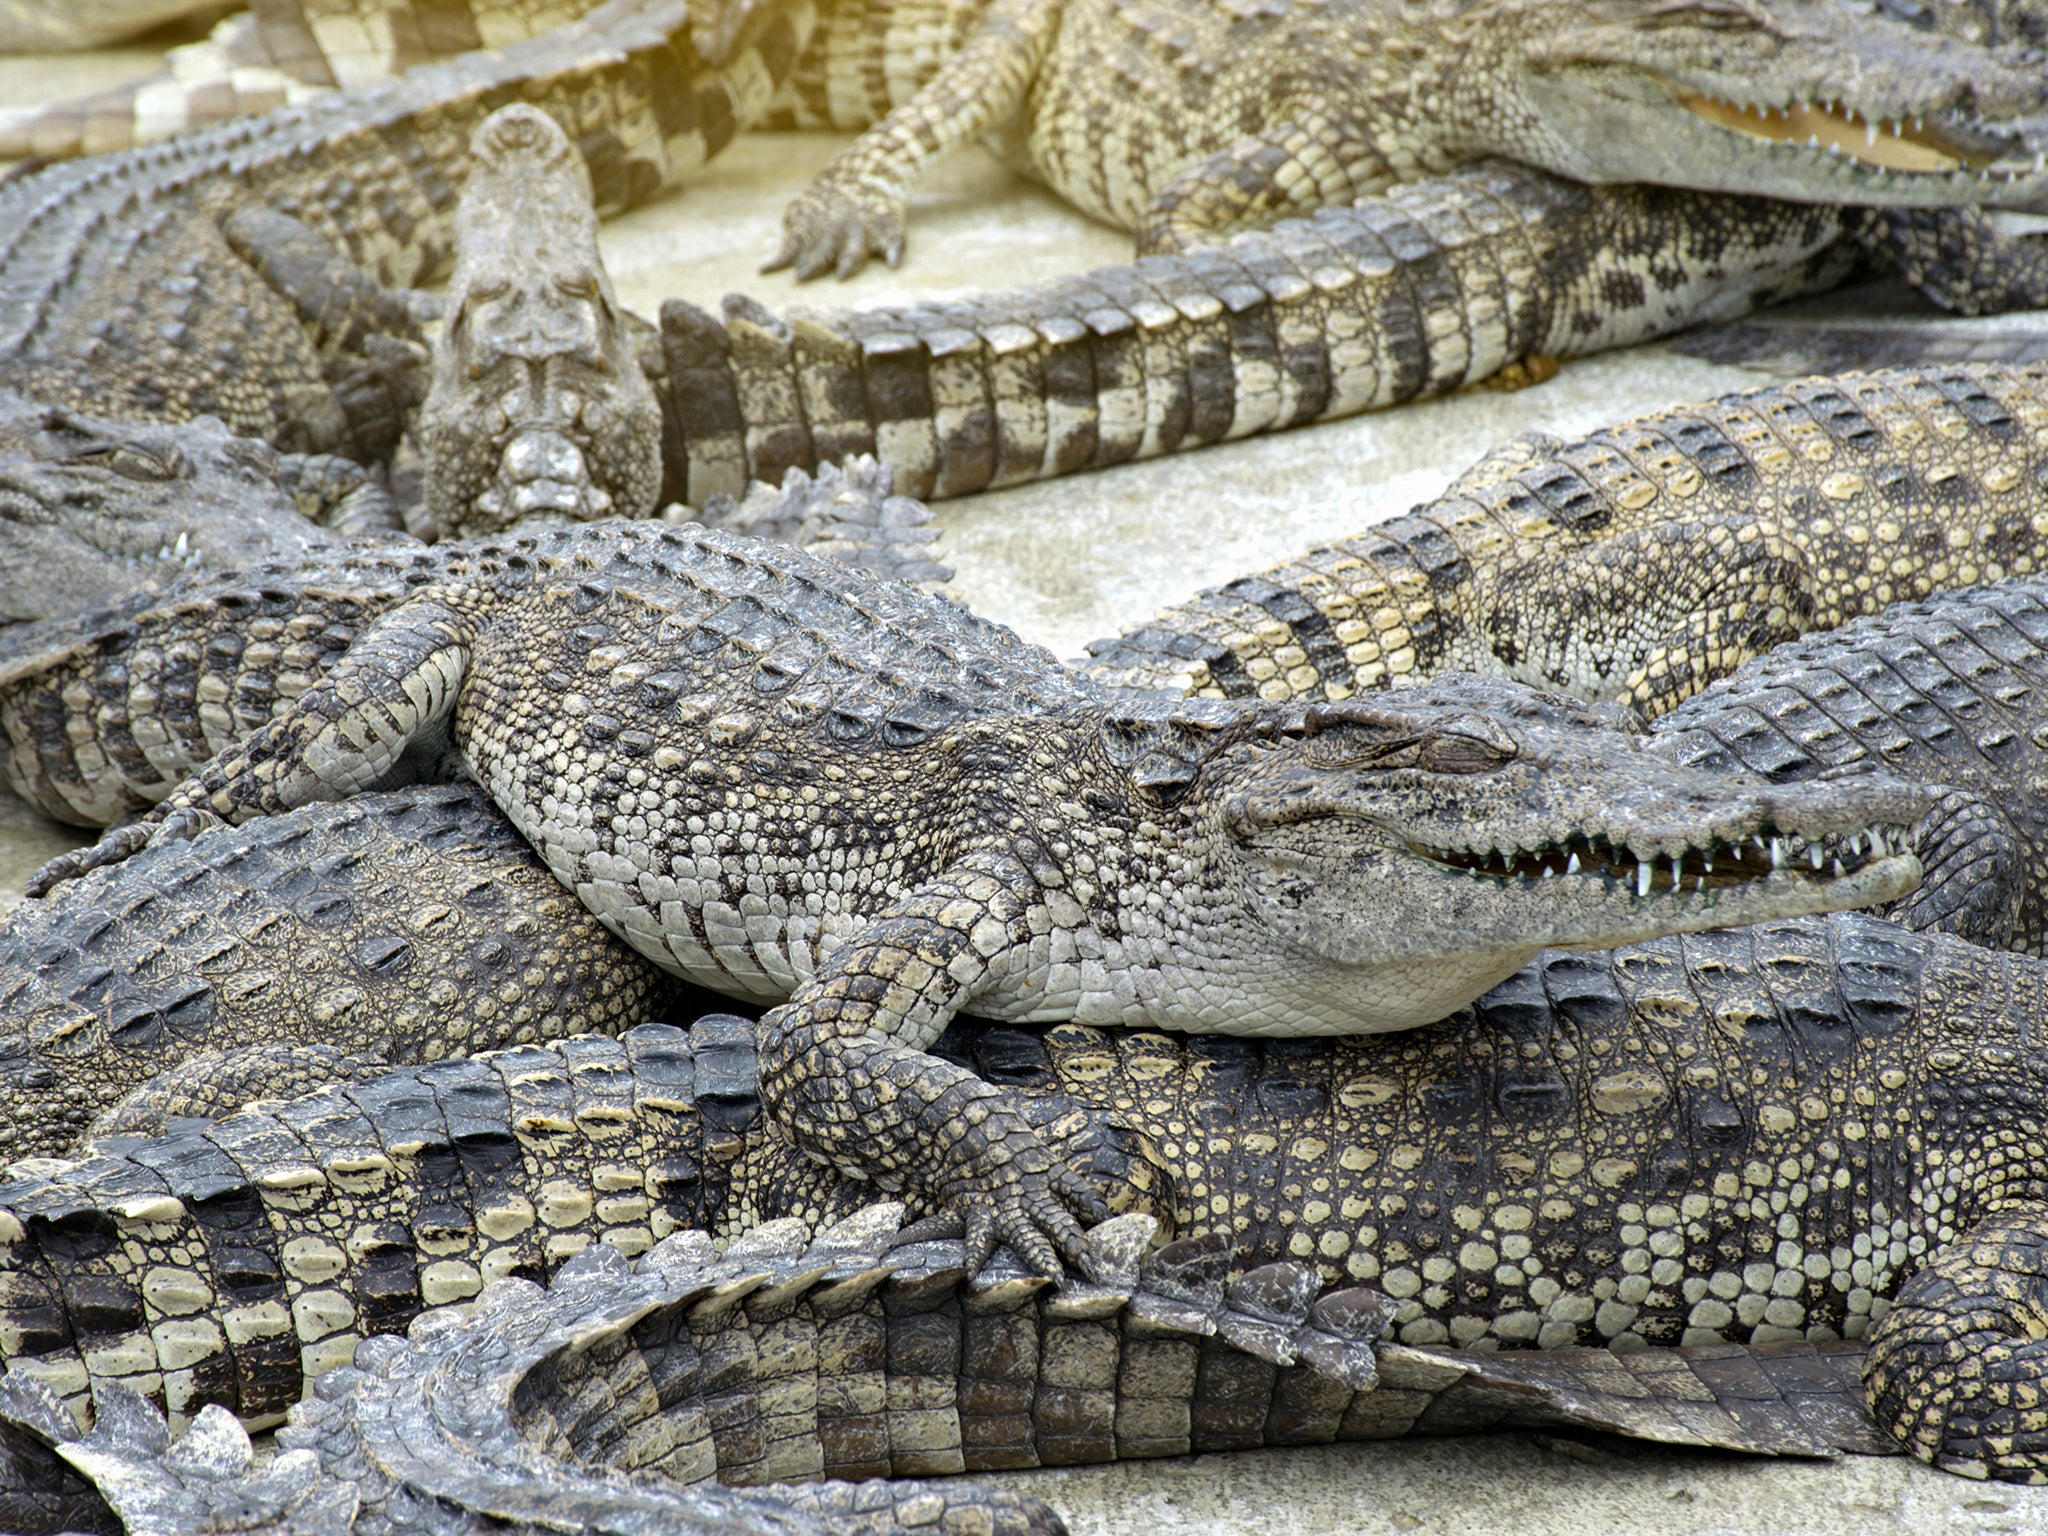 Some of the 2,900 crocodiles displayed during auction at a crocodile farm in Ayutthaya province north of Thailand.